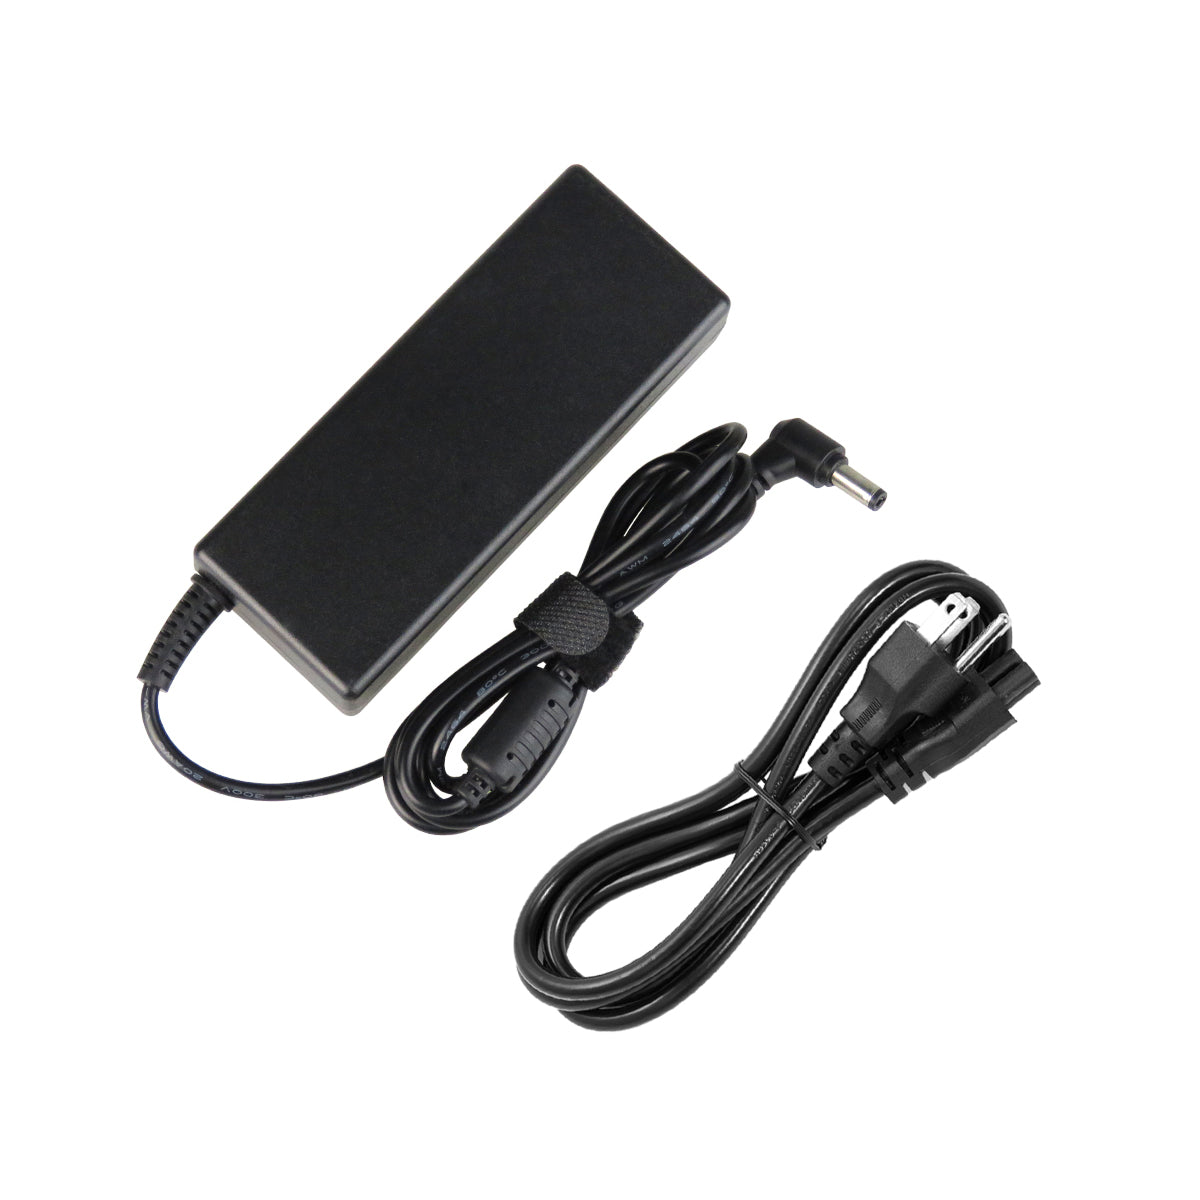 AC Adapter Charger for ASUS X452ep Notebook.